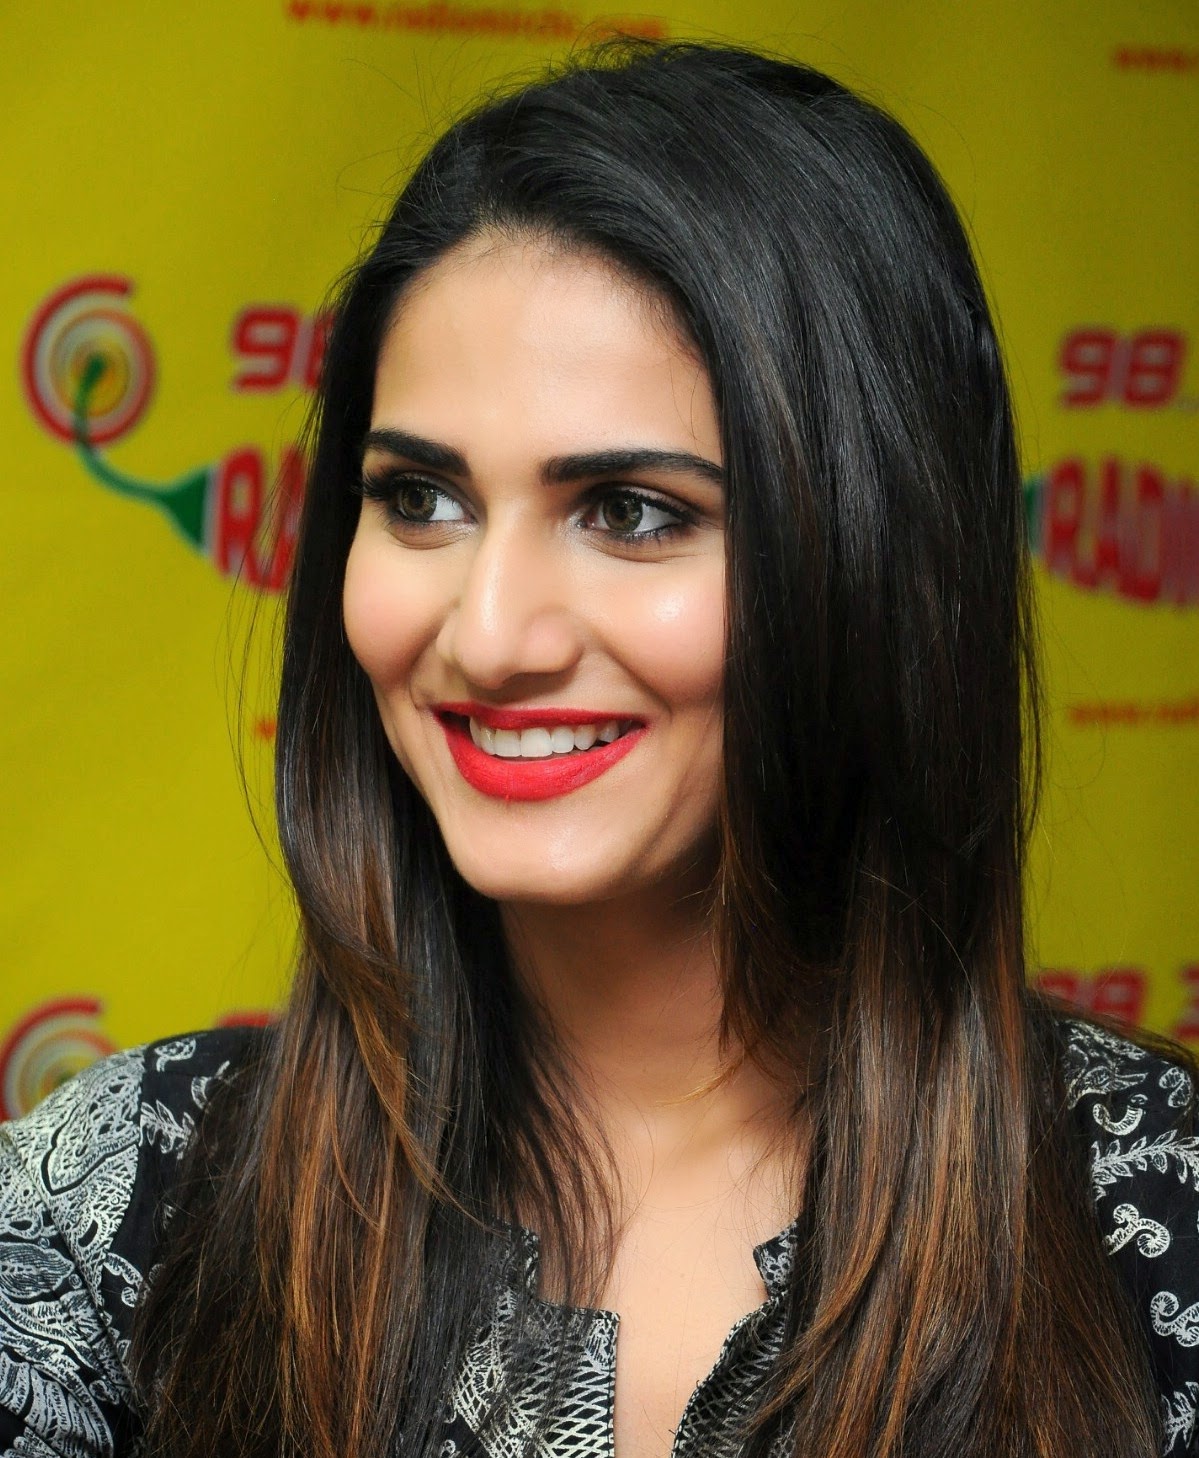 High Quality Bollywood Celebrity Pictures: Vaani Kapoor Looks Smoking ...